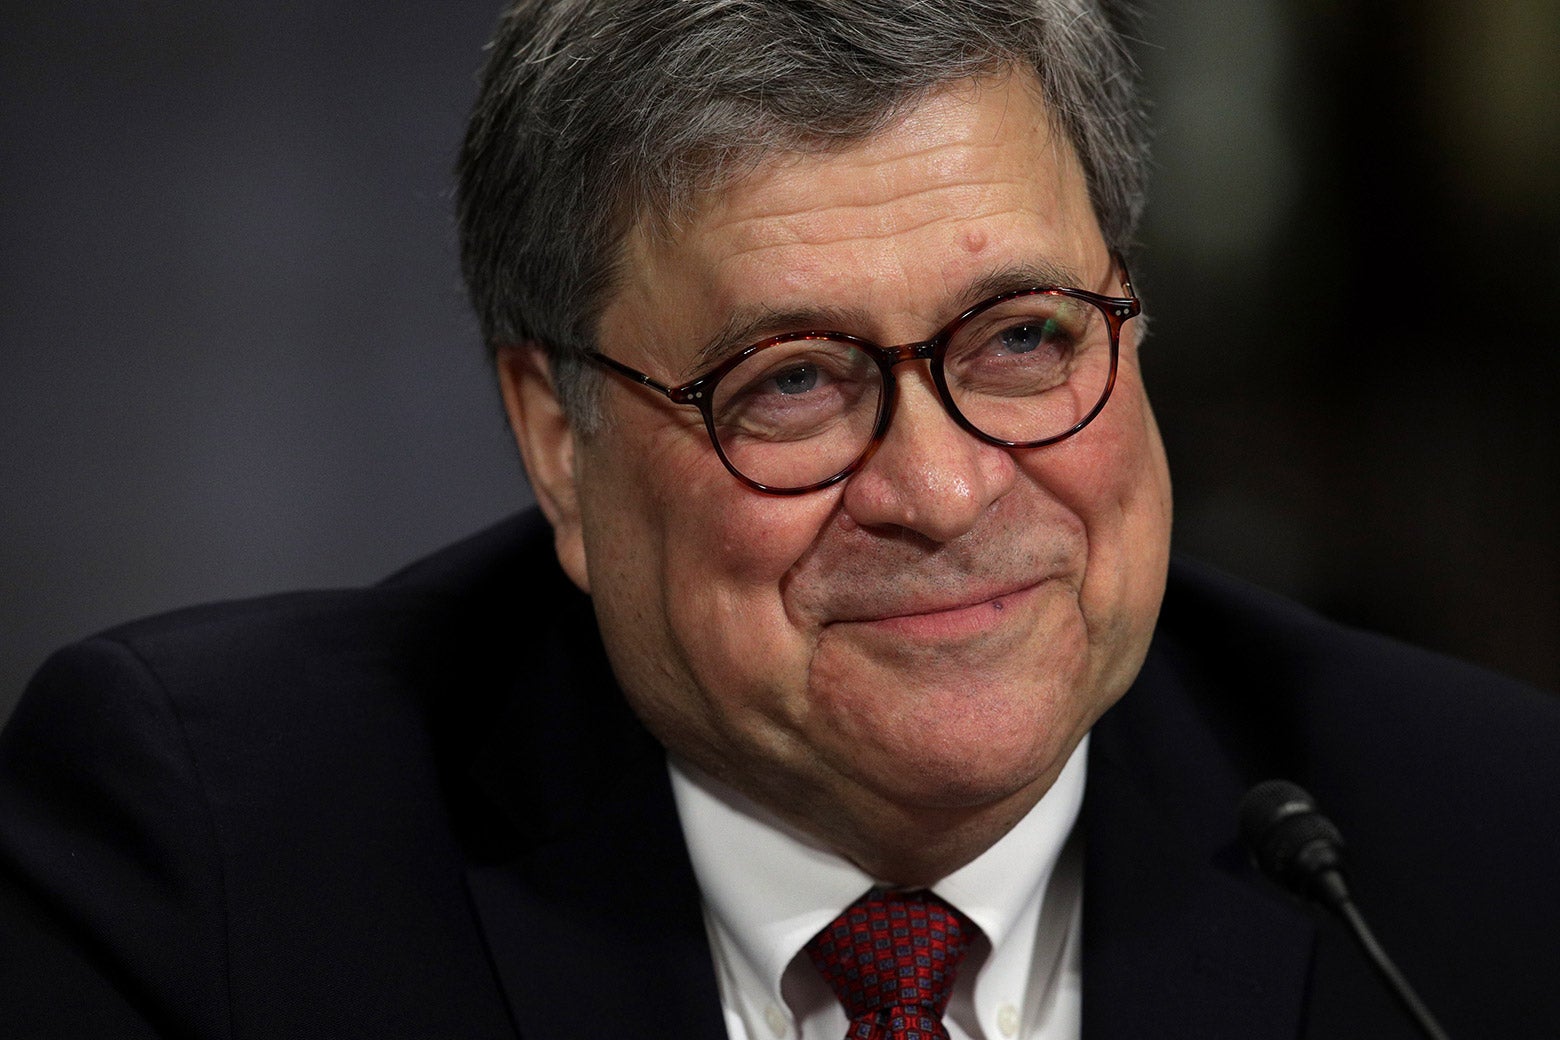 Barr smiling at a mic.